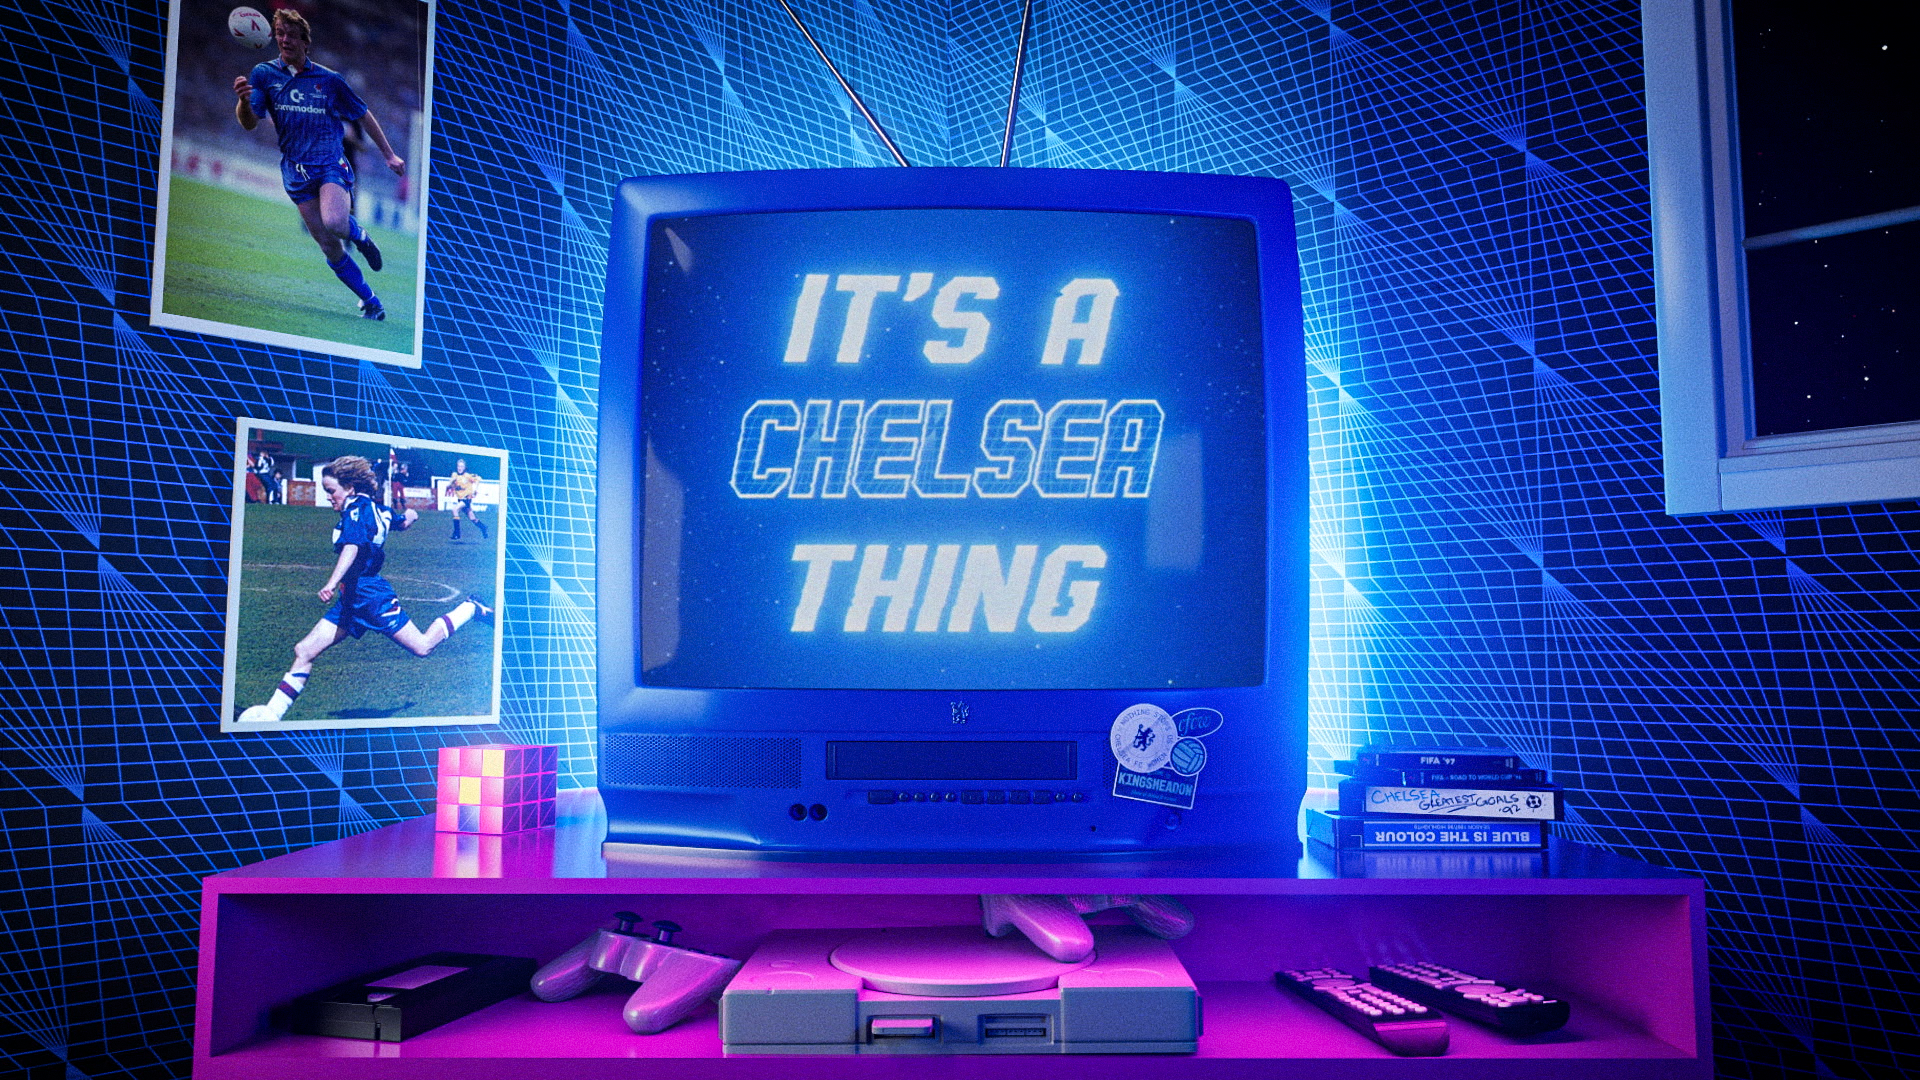 CFC AWAY KIT LAUNCH_HERO FILM_16x9_ITS A CHELSEA THING_VIDEO STILL.png